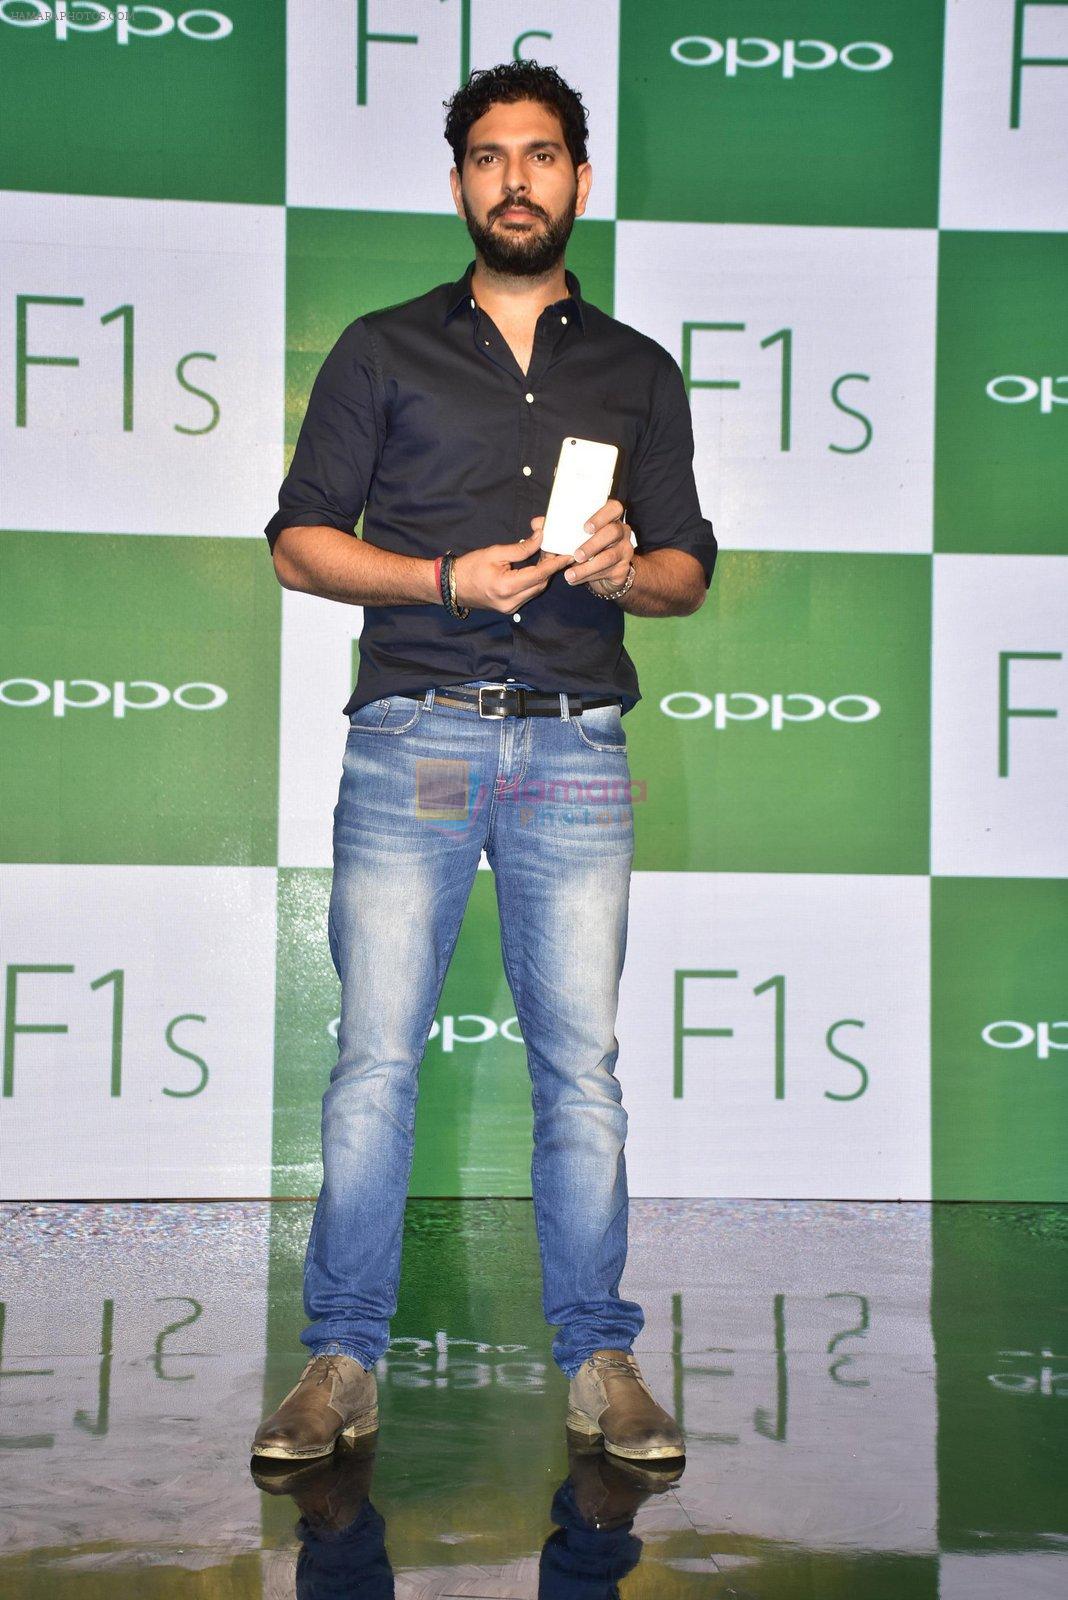 Yuvraj Singh at Oppo F1s mobile launch in Mumbai on 3rd Aug 2016